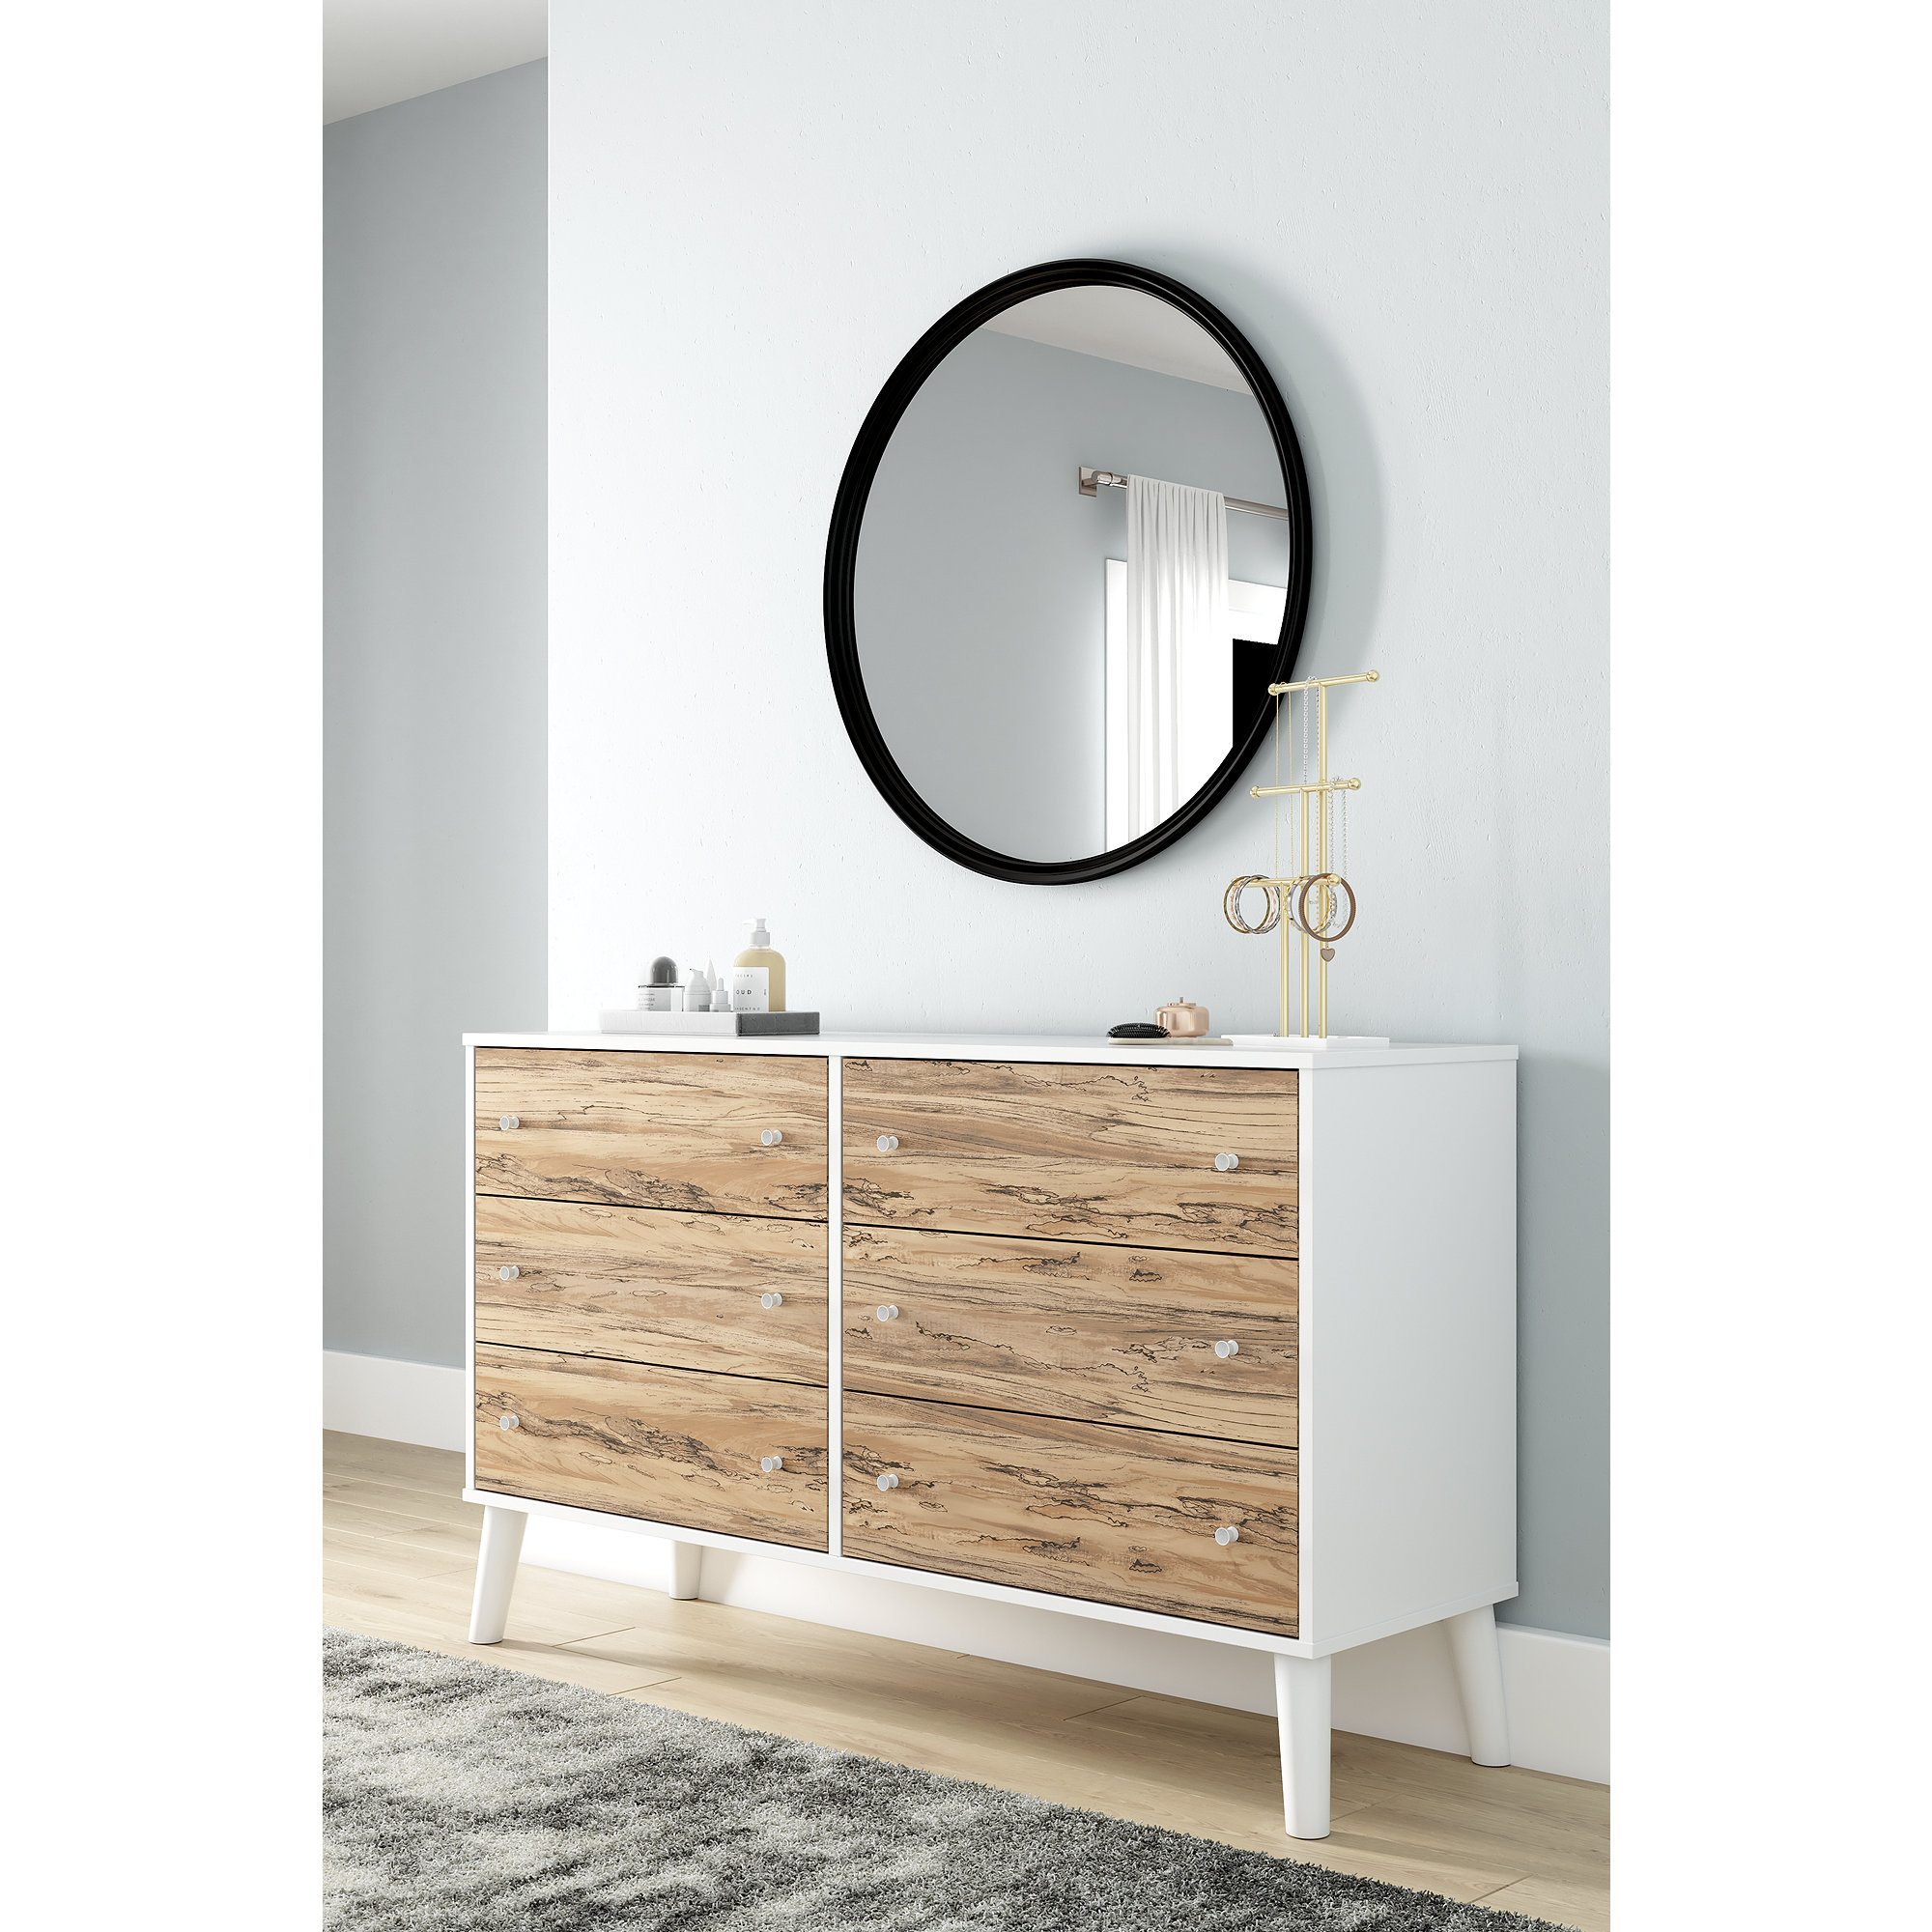 Signature Design by Ashley Contemporary Piperton 6 Drawer Dresser, Two-tone Brown/White - image 2 of 7